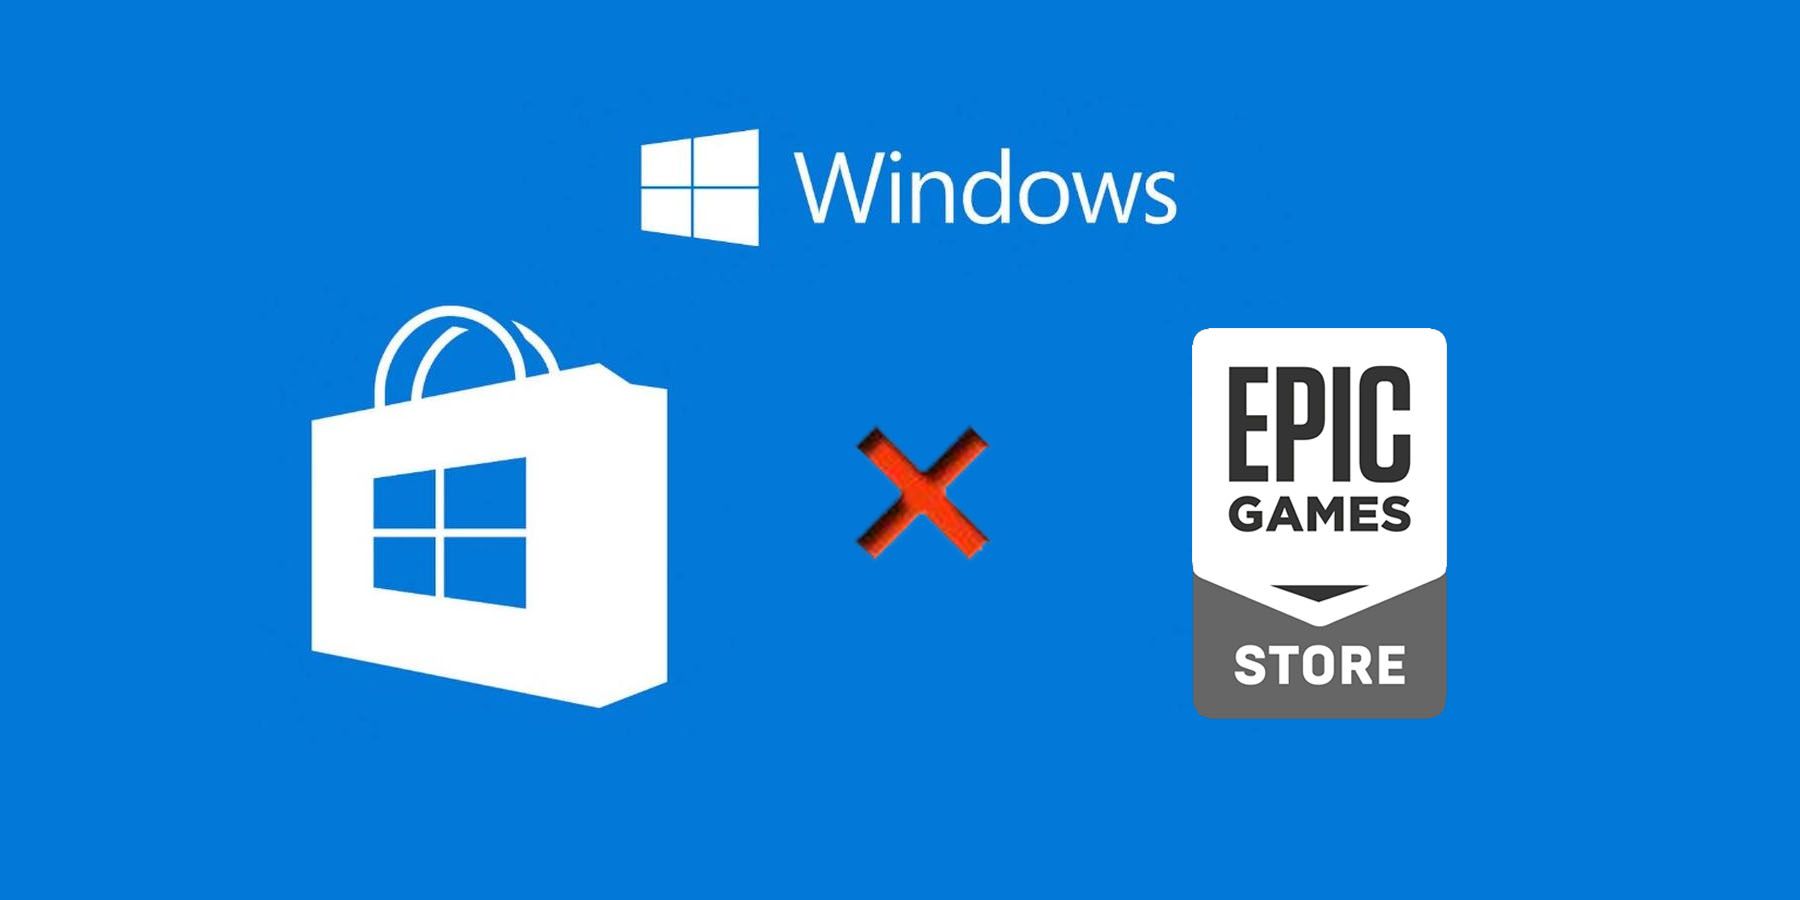 Epic Games Store is now available in the Microsoft Store